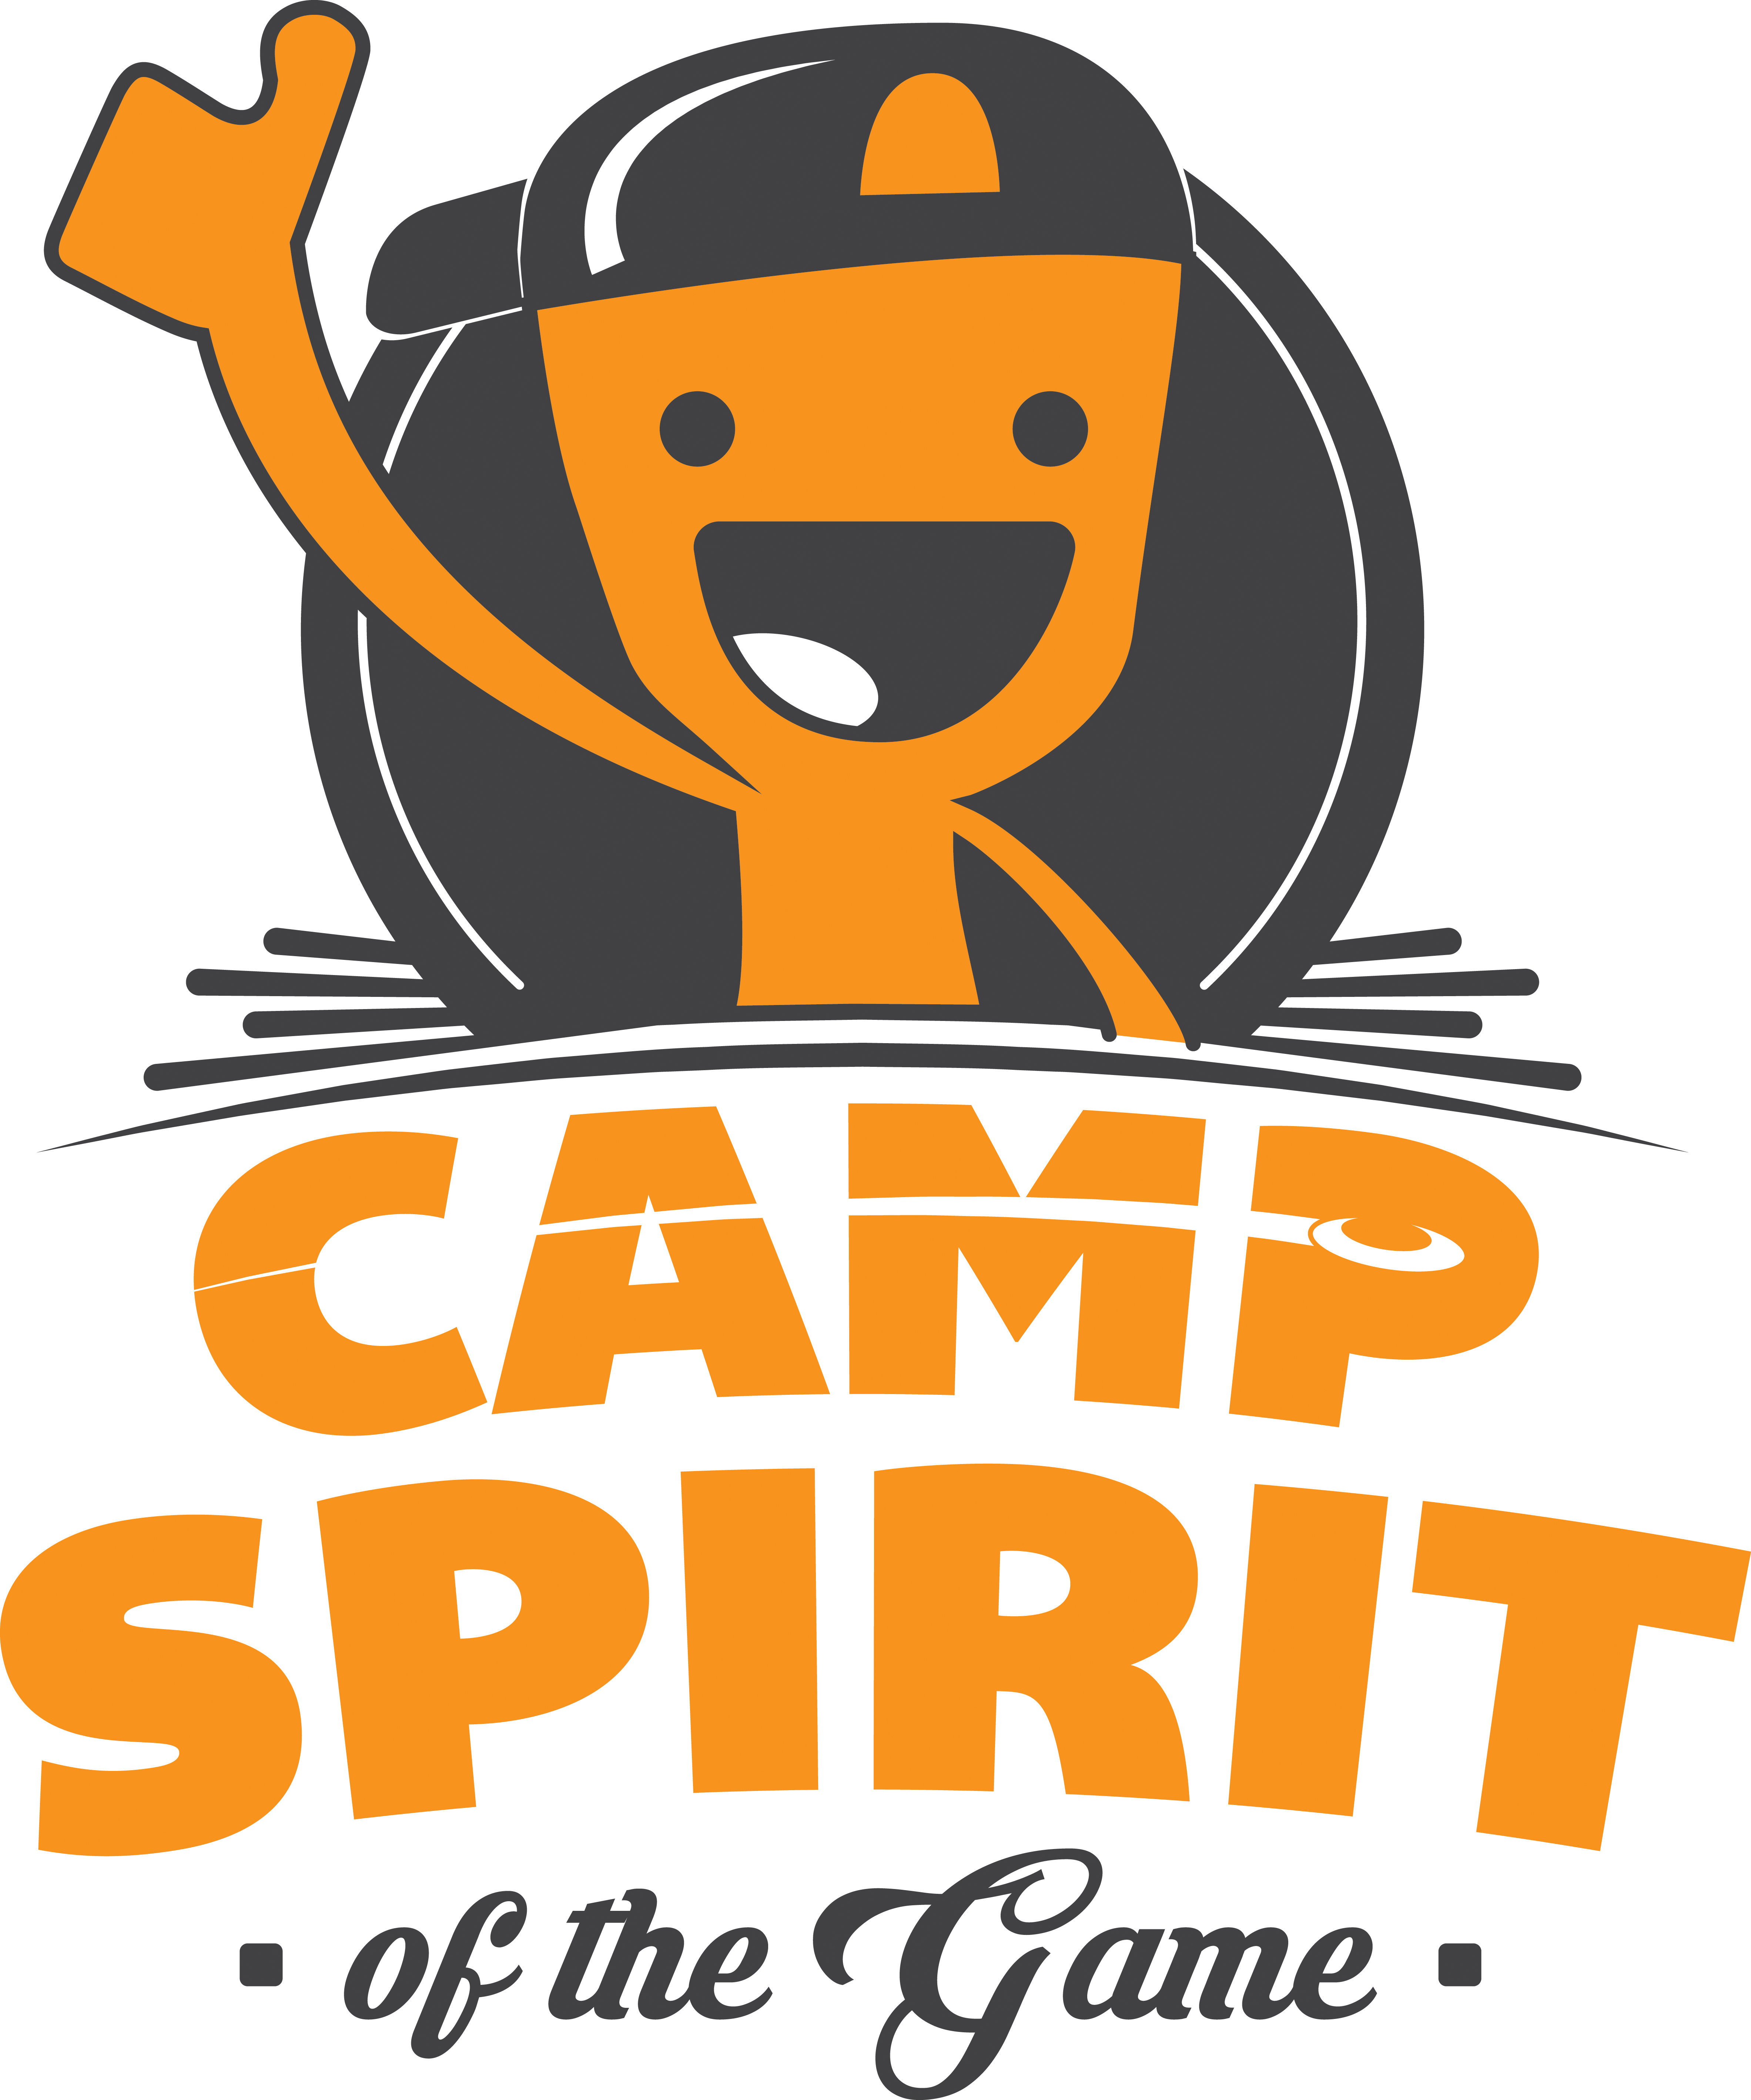 Teach clipart camp game. Overview spirit of the